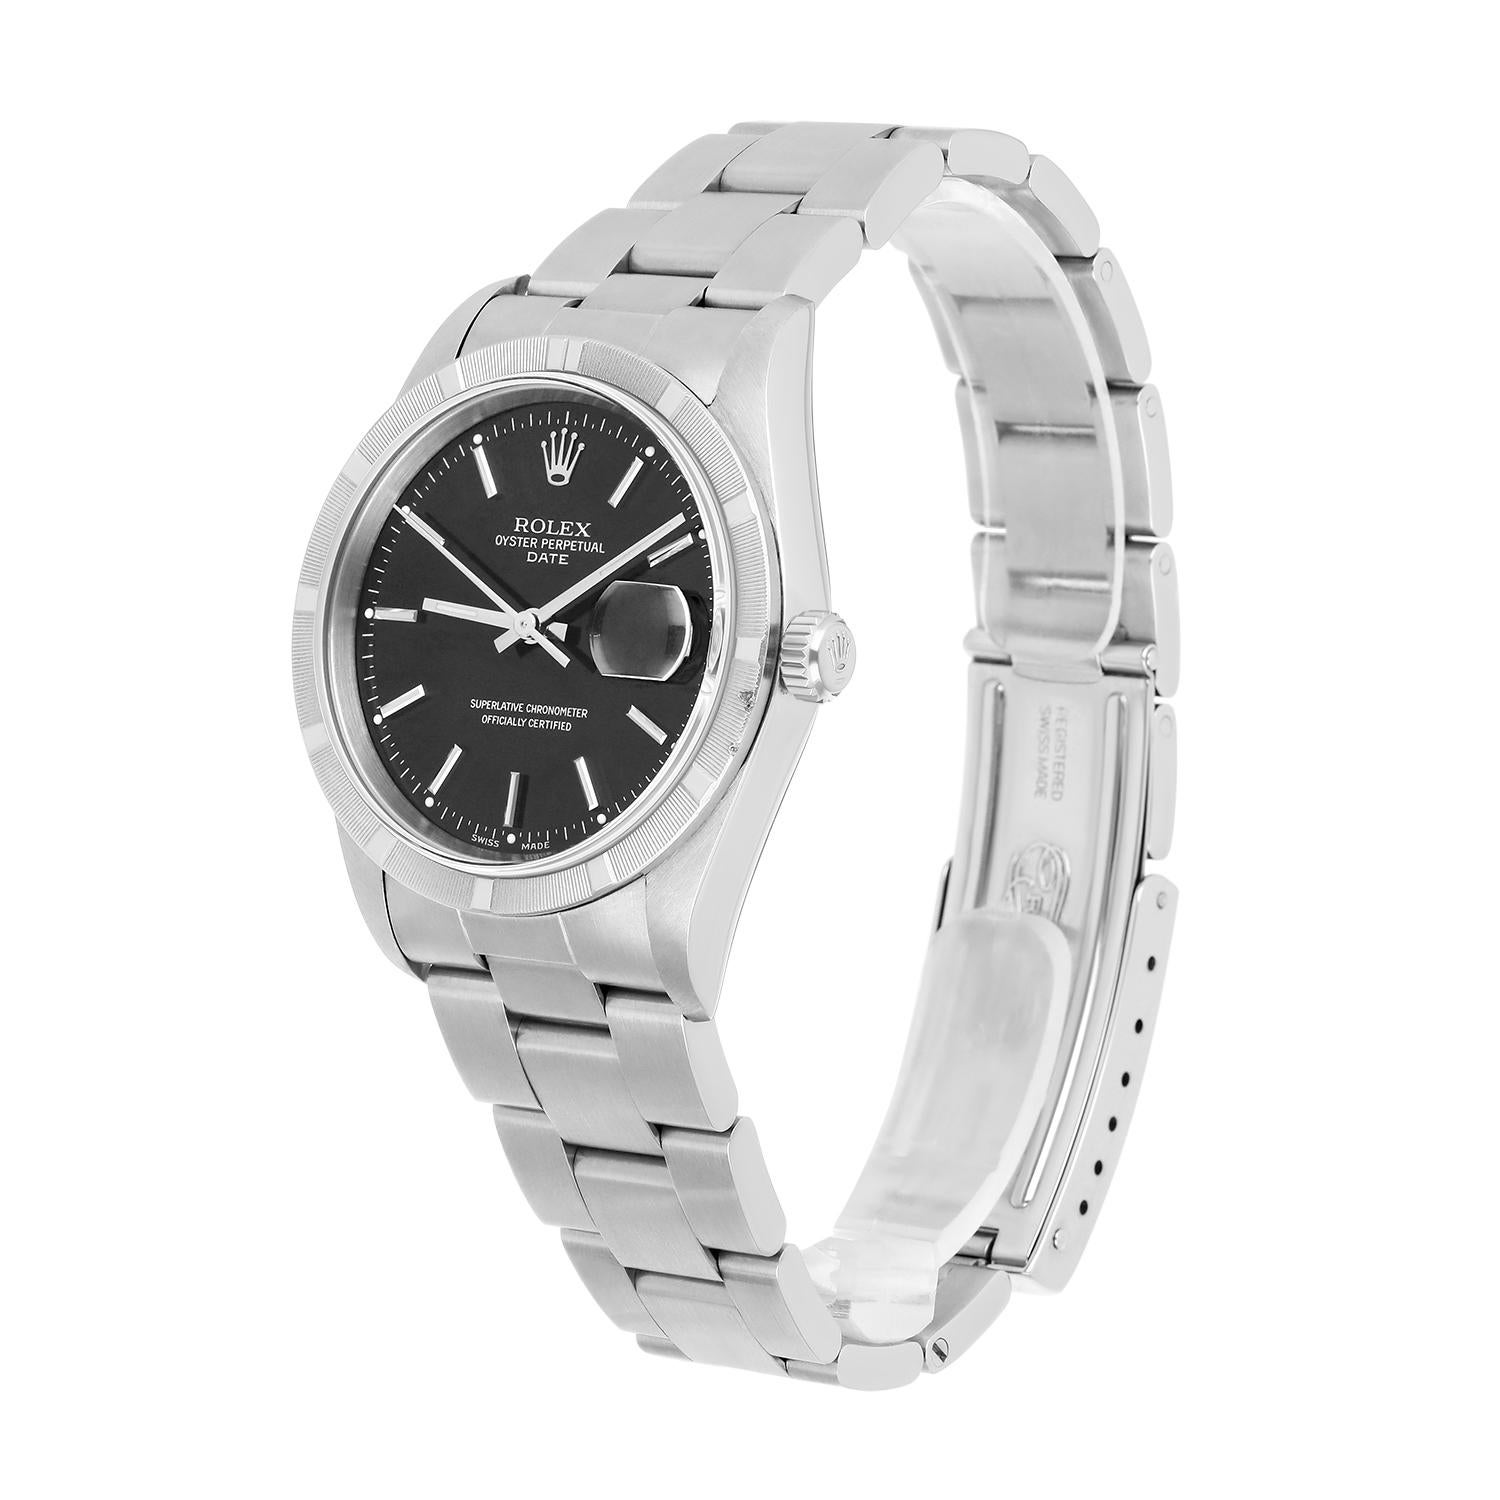 Men's Unisex Rolex Date Stainless Steel Watch Oyster Black Dial 15210 Circa 1999 For Sale